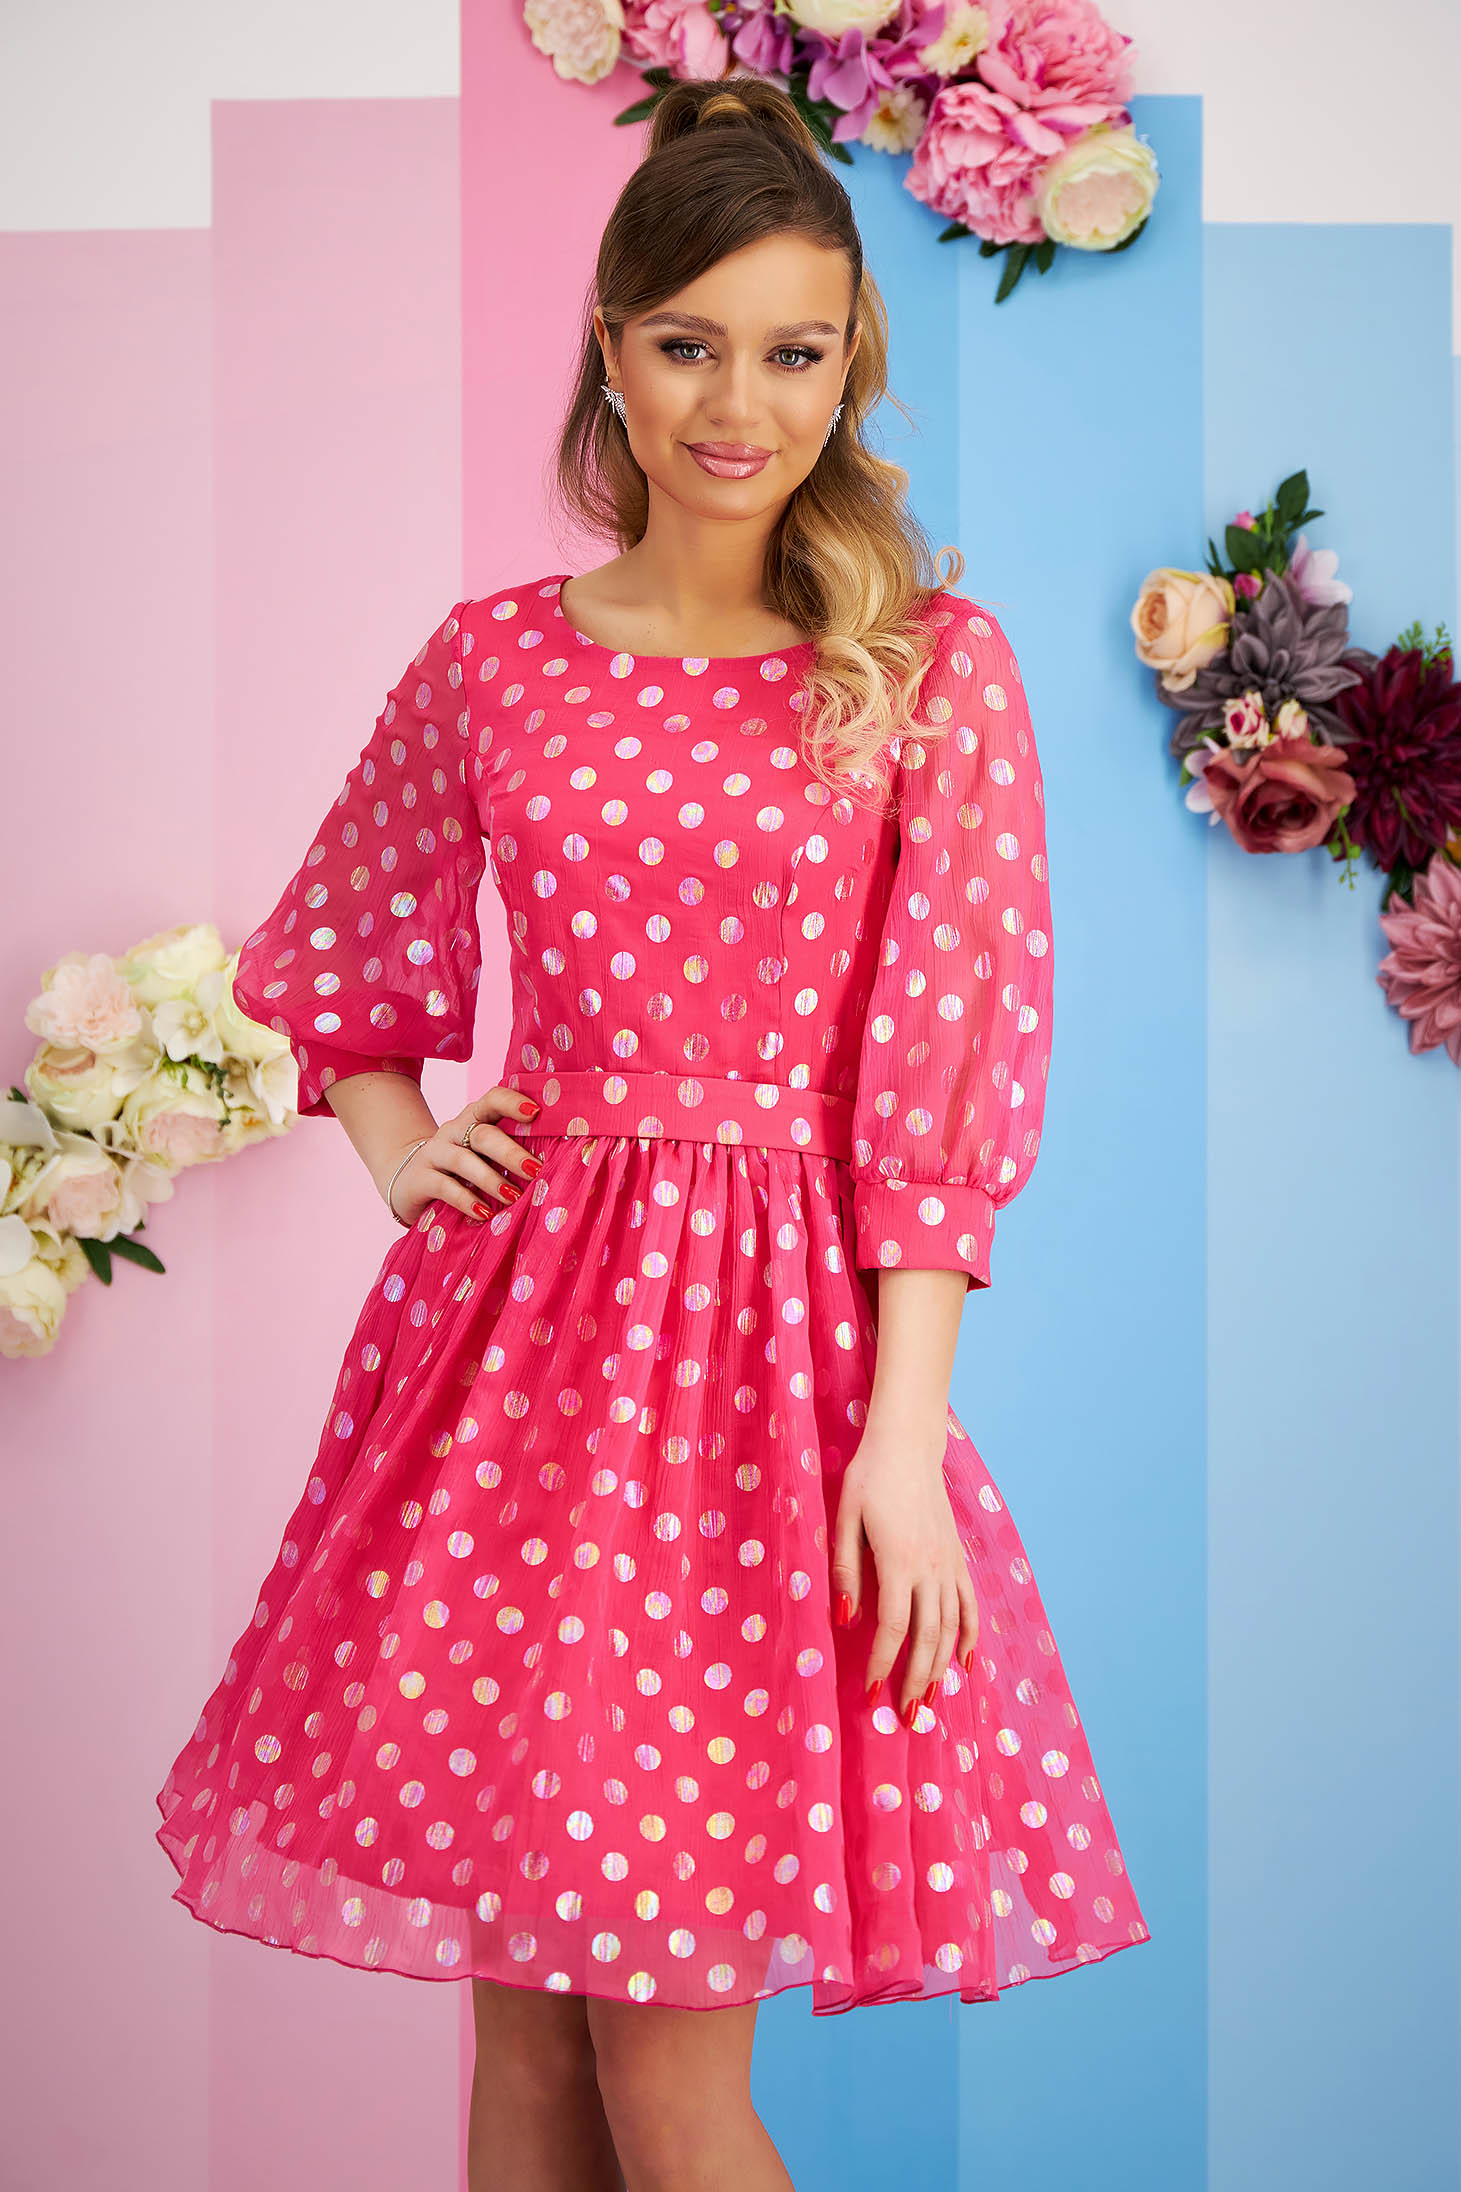 Fuchsia Veil Dress in A-line with Polka Dots Accessorized with Belt and Bow - StarShinerS 2 - StarShinerS.com